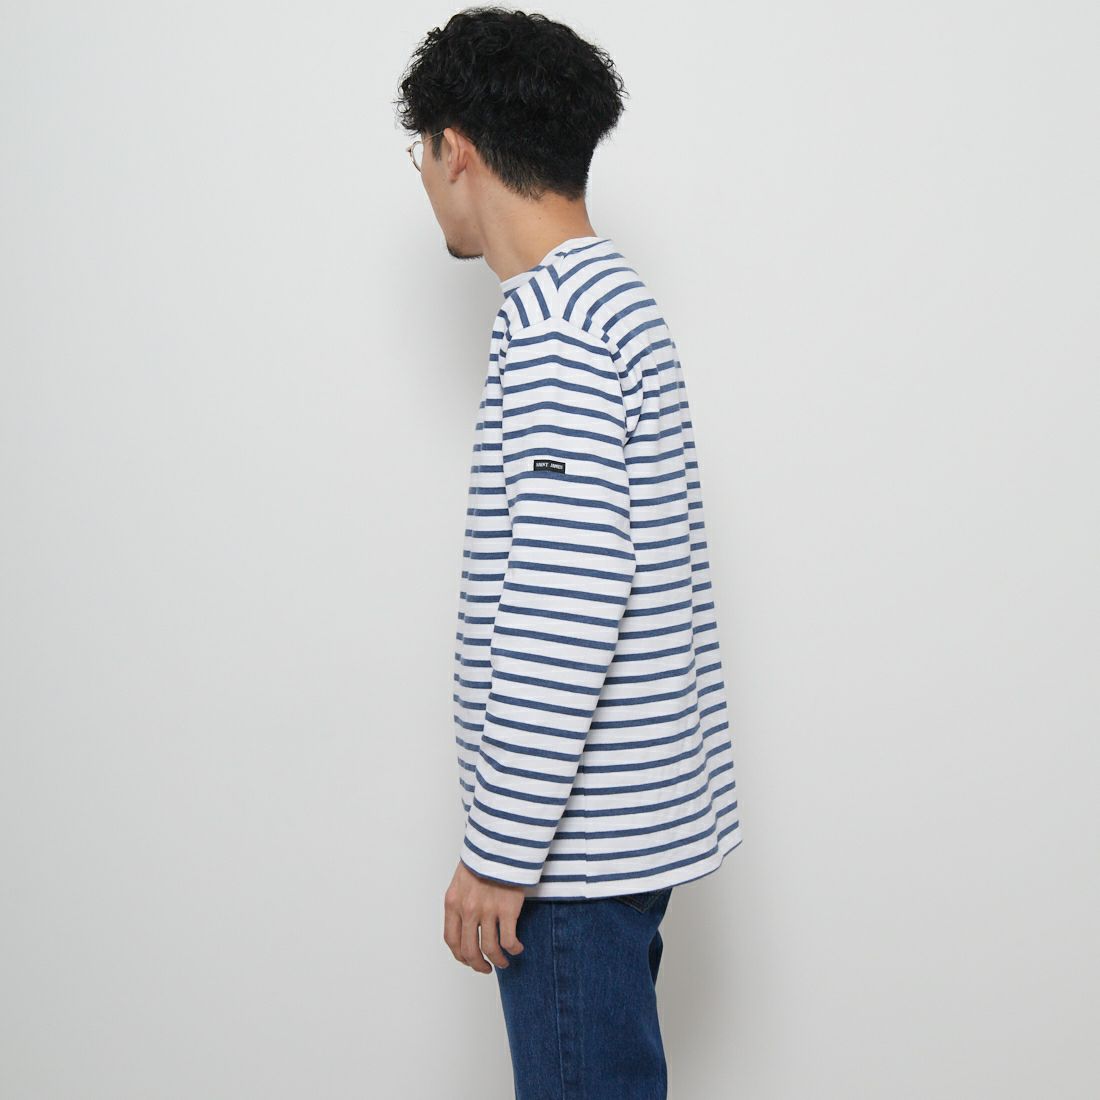 ST.JAMES [セントジェームス] 別注 バスクボーダーロングスリーブTシャツ [OUESSANT-JF] NEI/IND&&モデル身長：168cm 着用サイズ：5&&